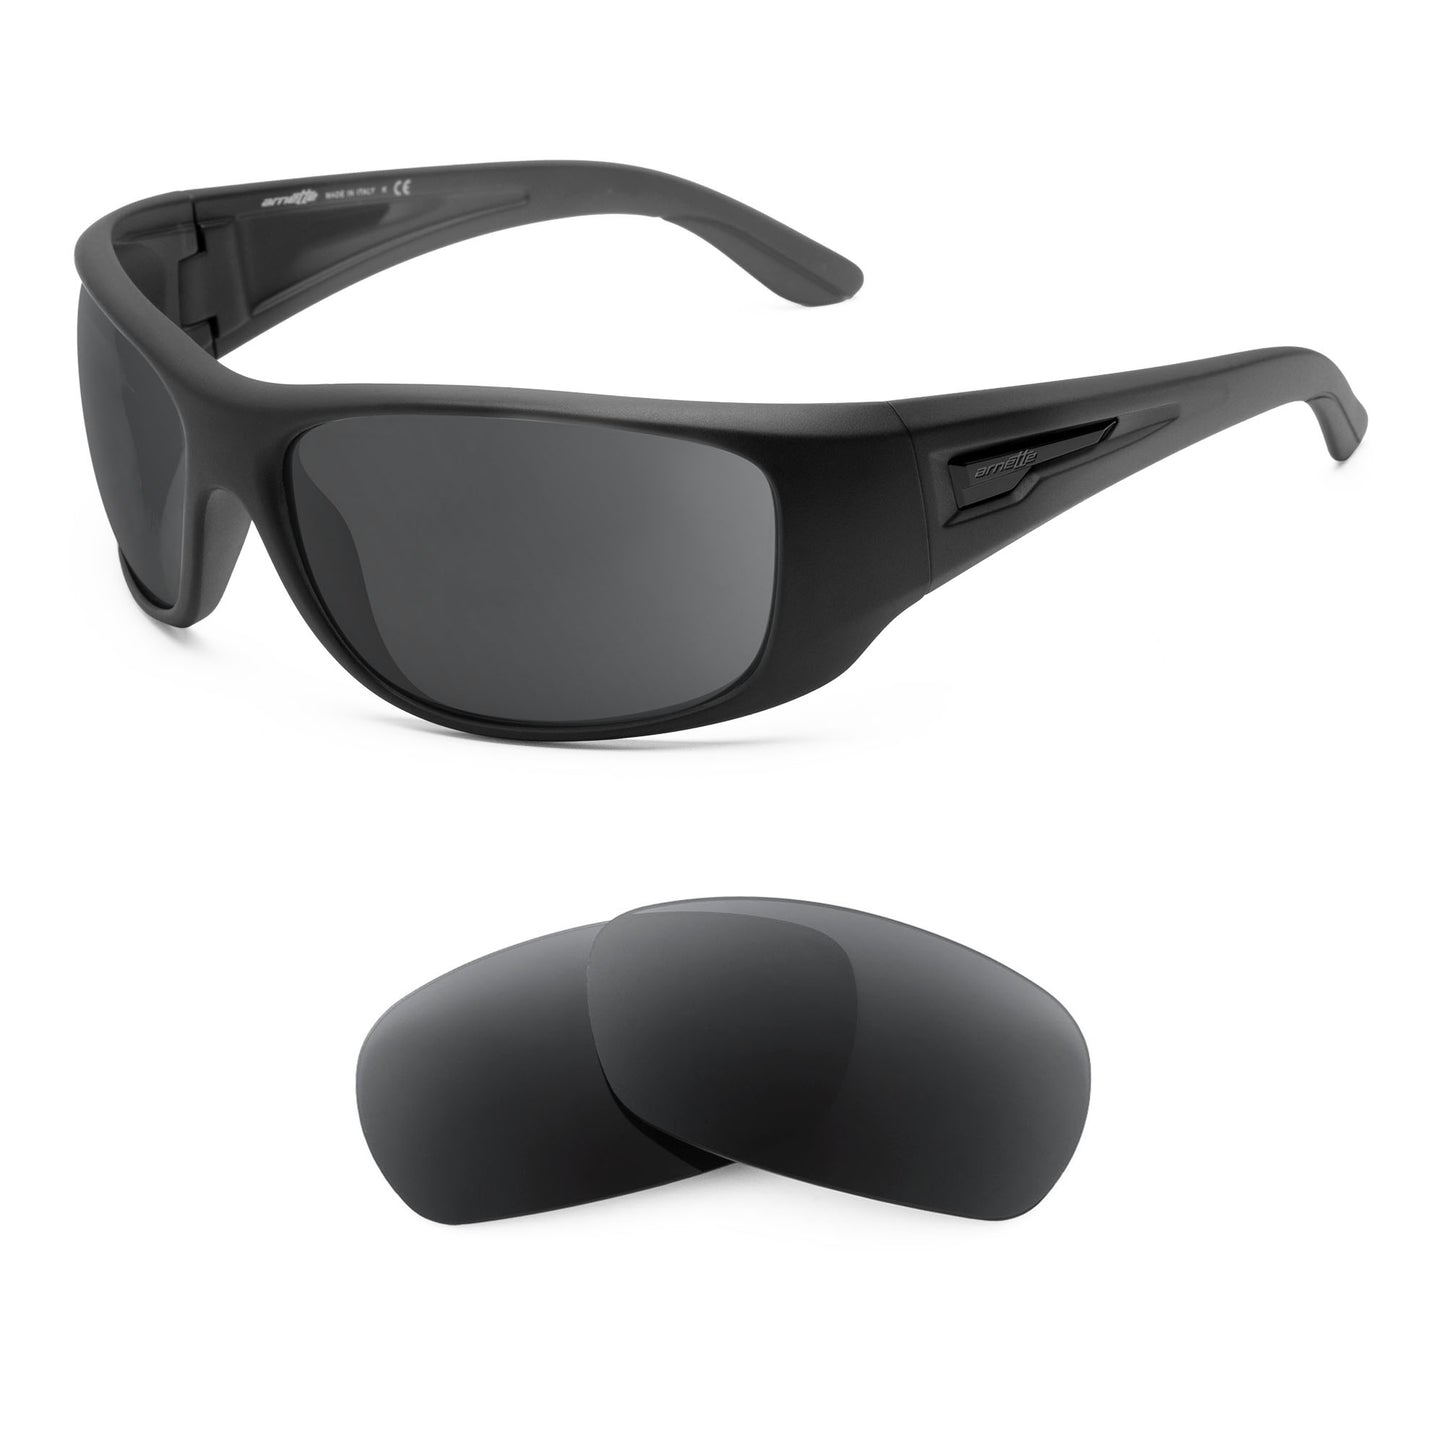 Arnette Heist sunglasses with replacement lenses